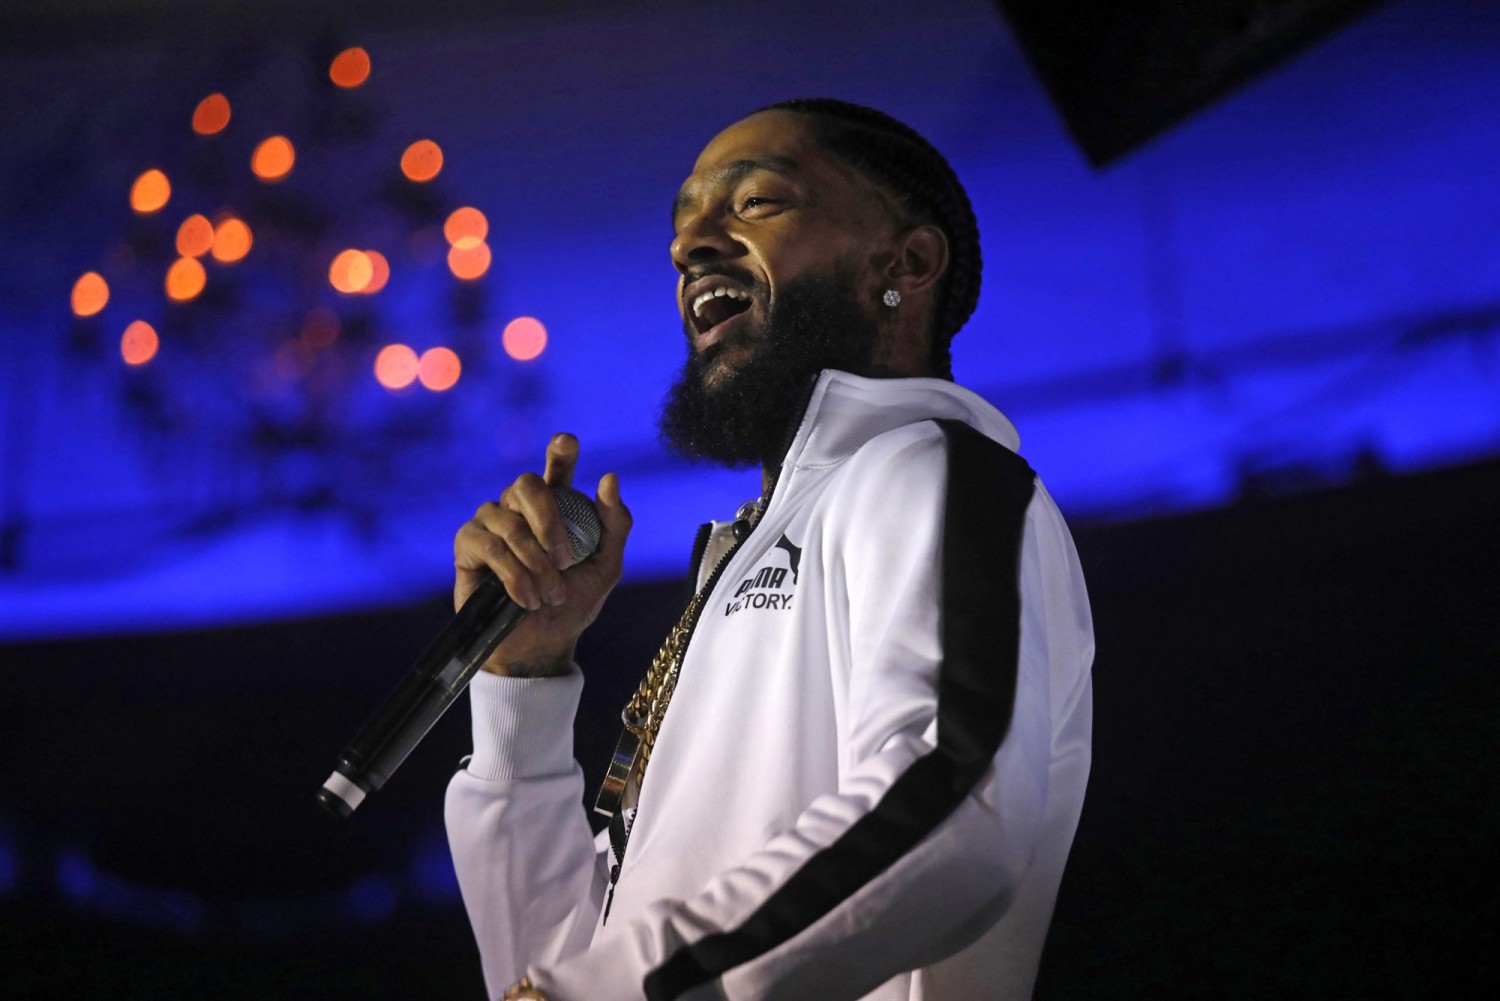 NBCBLK Nipsey Hussle murdered after snitch remark, grand jury transcripts say